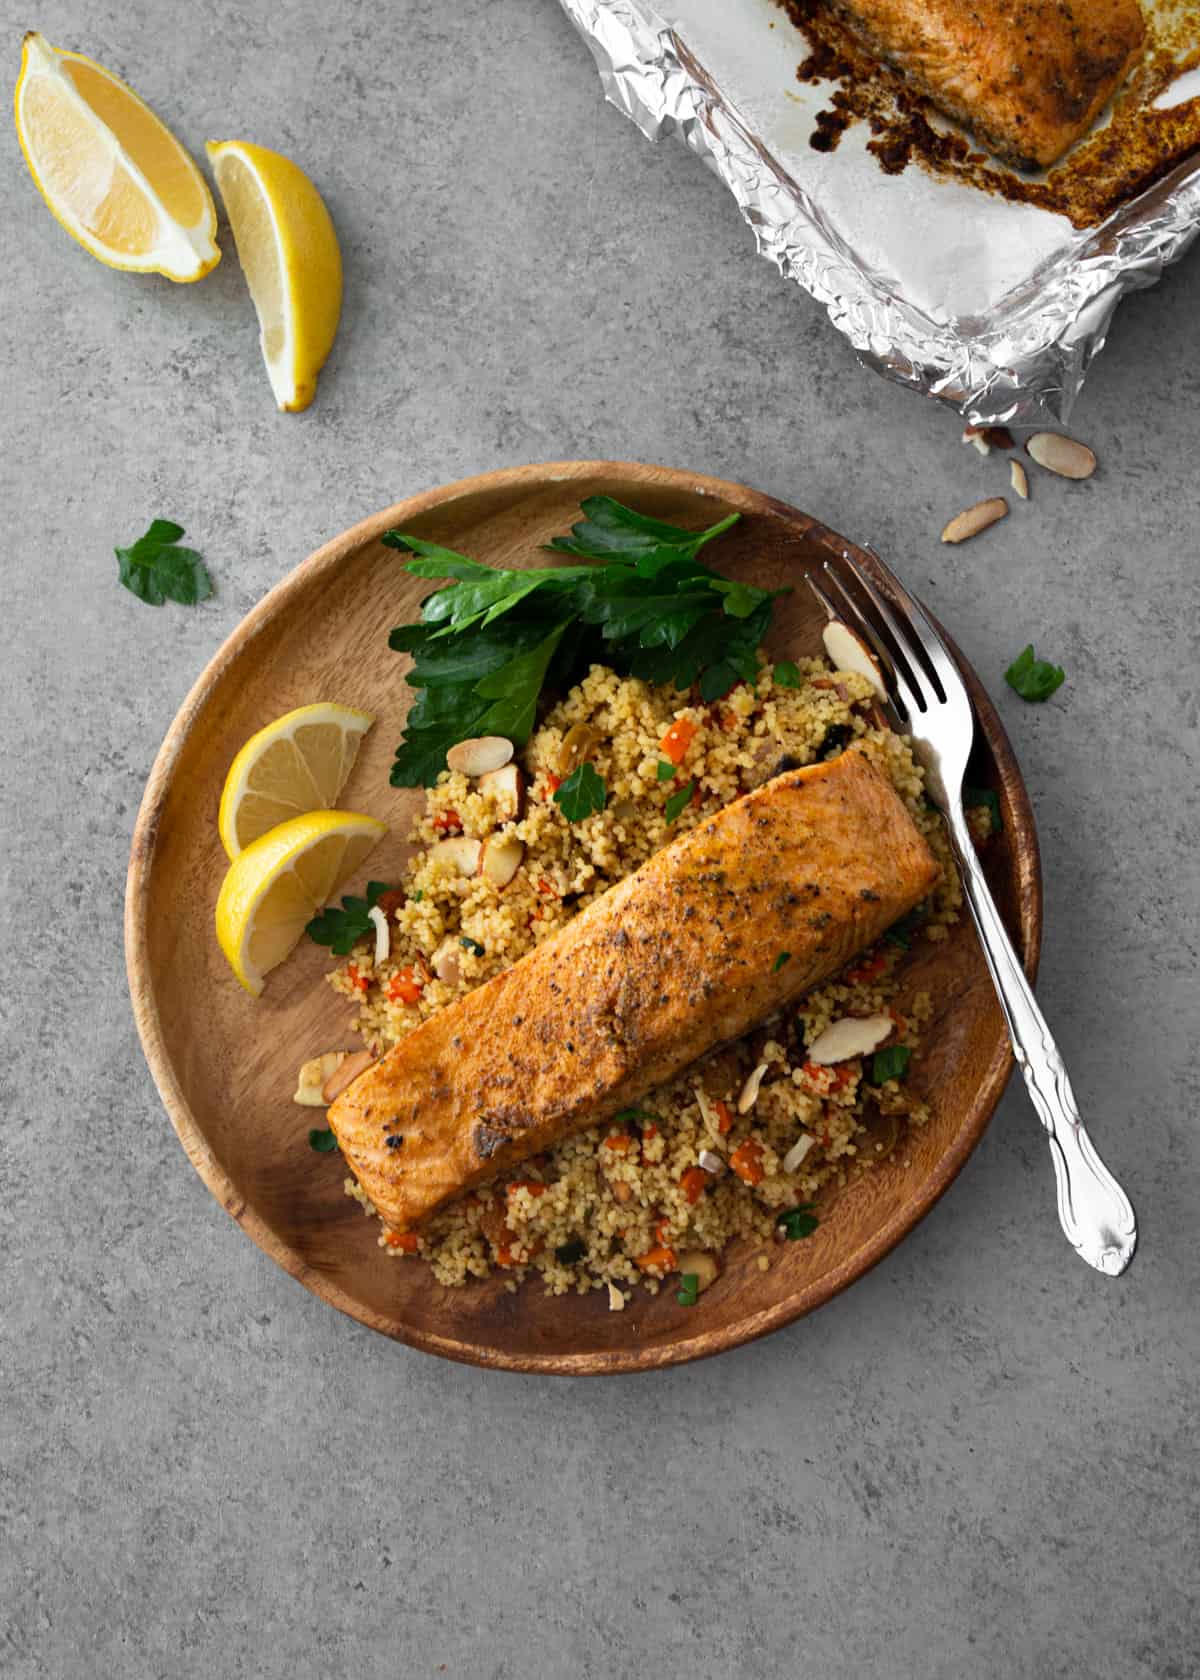 salmon and couscous on a round wooden plate